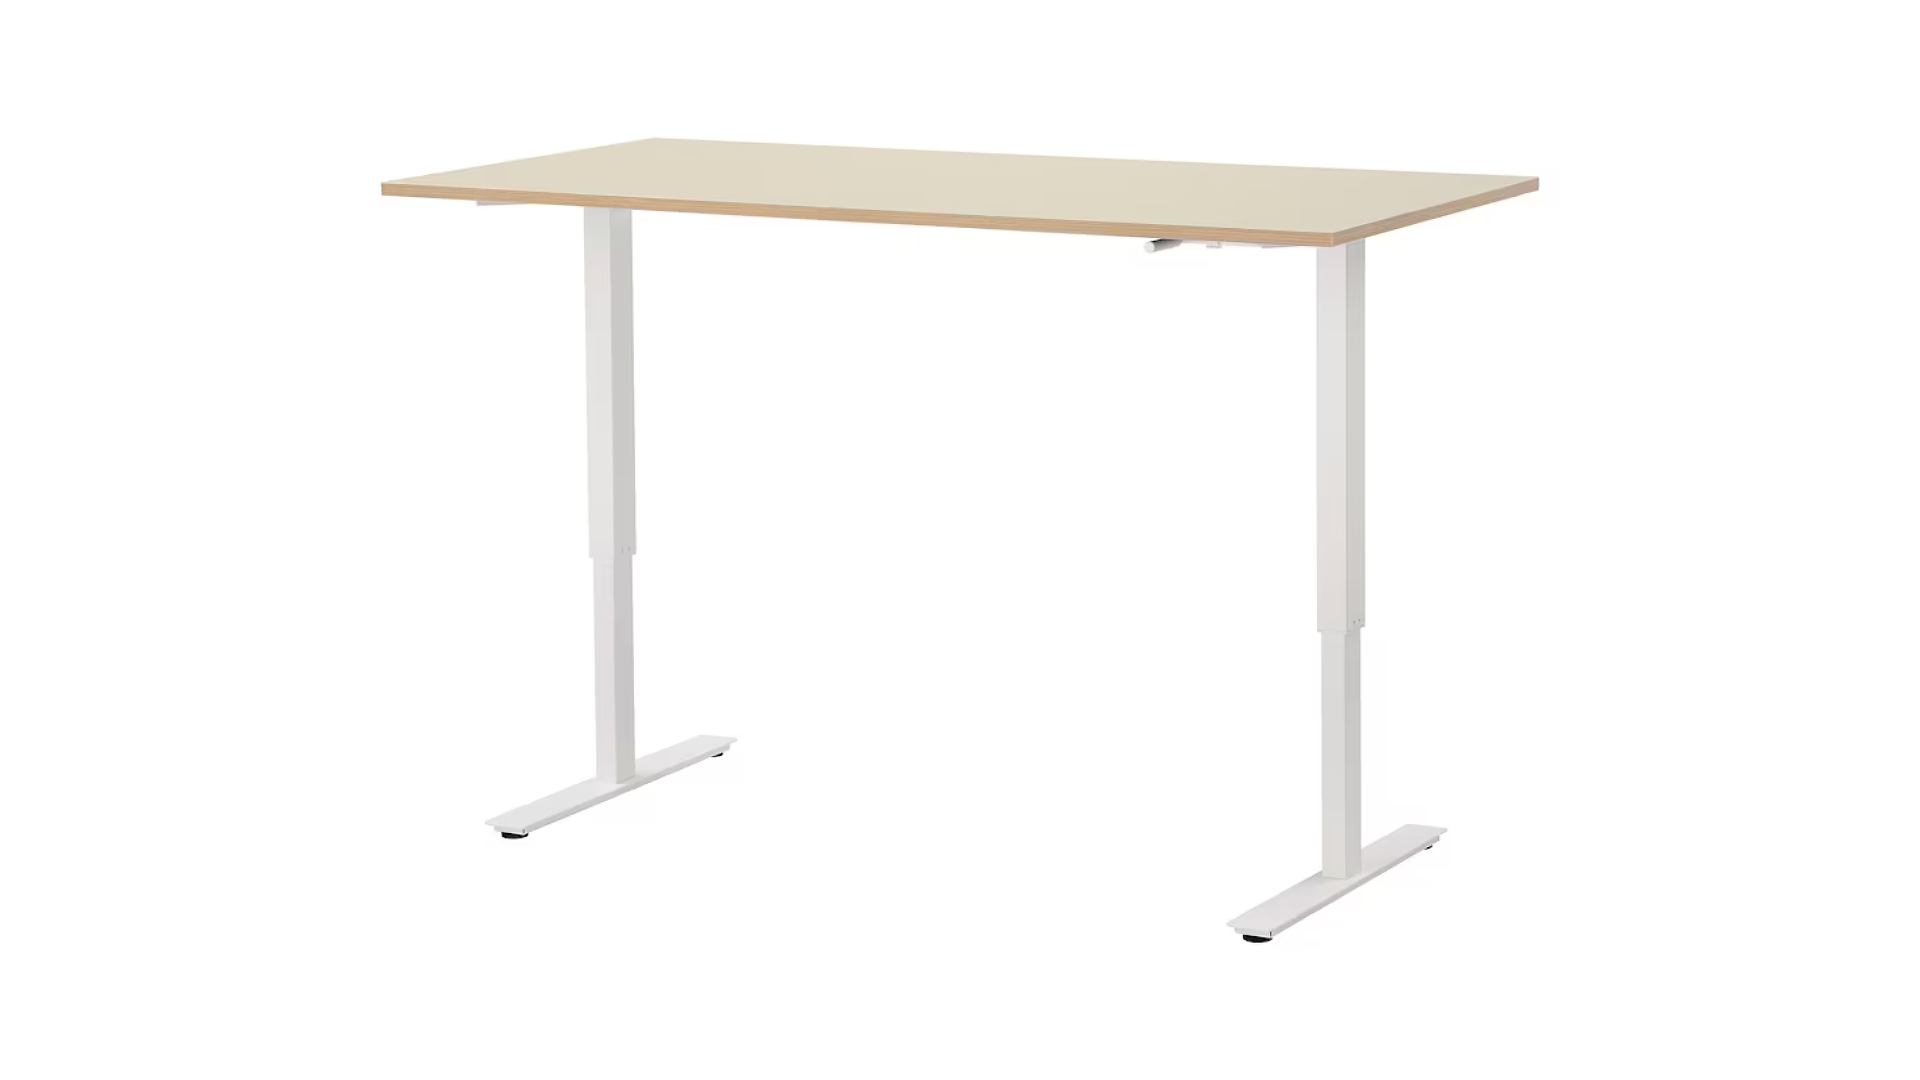 The Ikea standing desk has a light wood tabletop and white legs, seen here against a white background